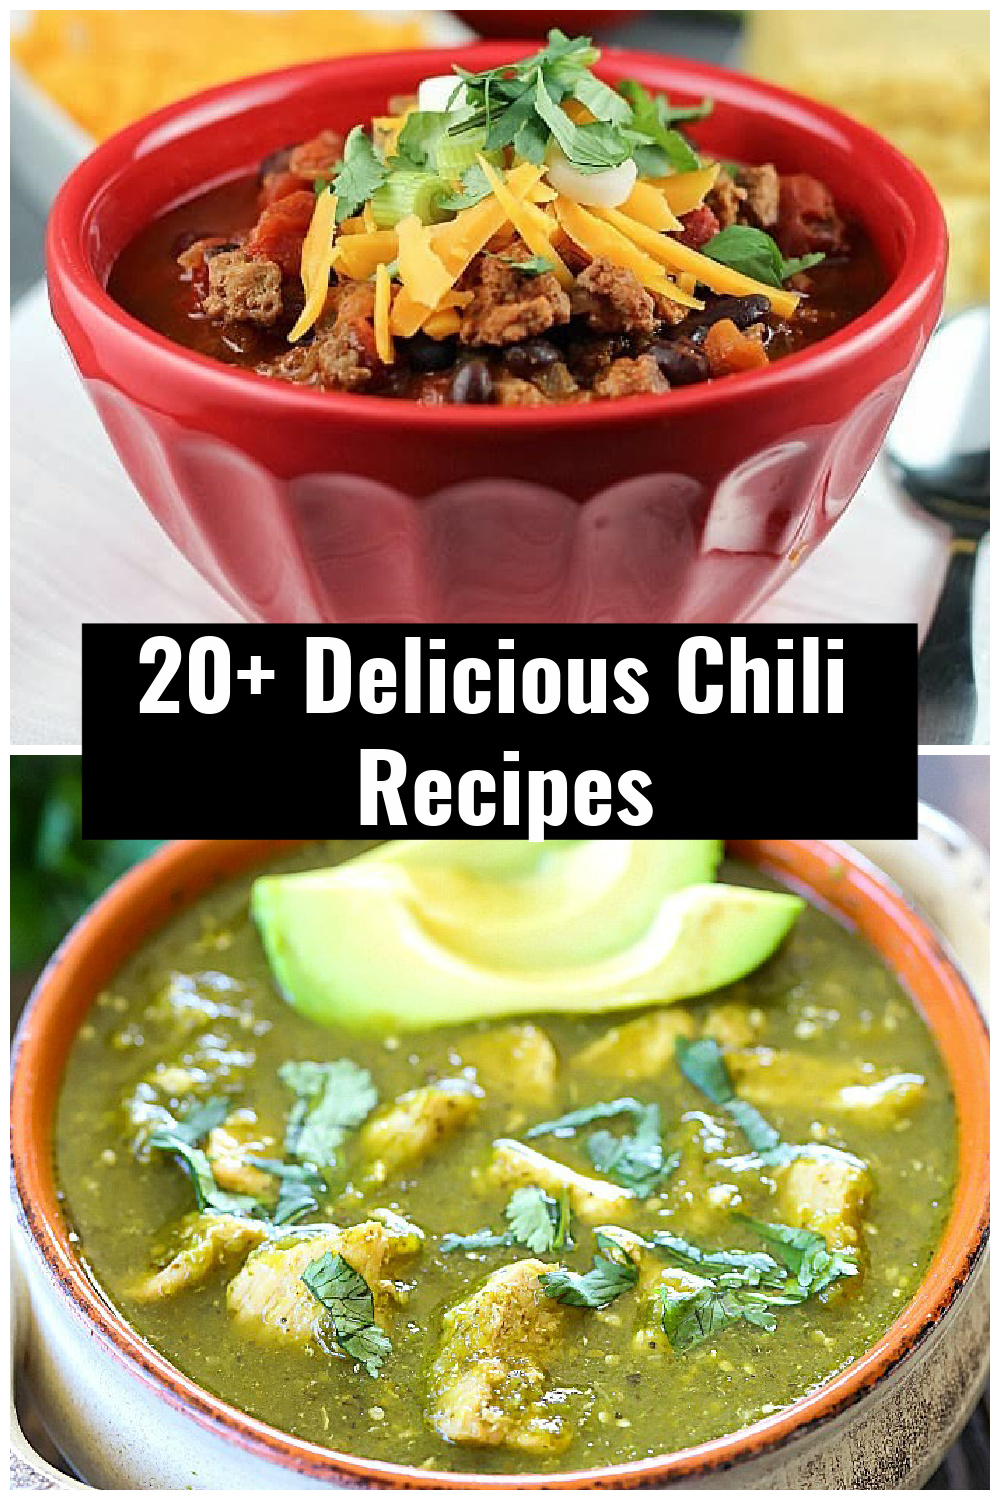  It's that time of year! Time for a giant bowl full of chili! Here are over 20 Chili Recipes that you NEED to make this season. Check out this 20+ Chili Round Up for some great ideas on what chili recipes you need to try! #chili #roundup #dinner #dinnerideas #recipes via @jennikolaus